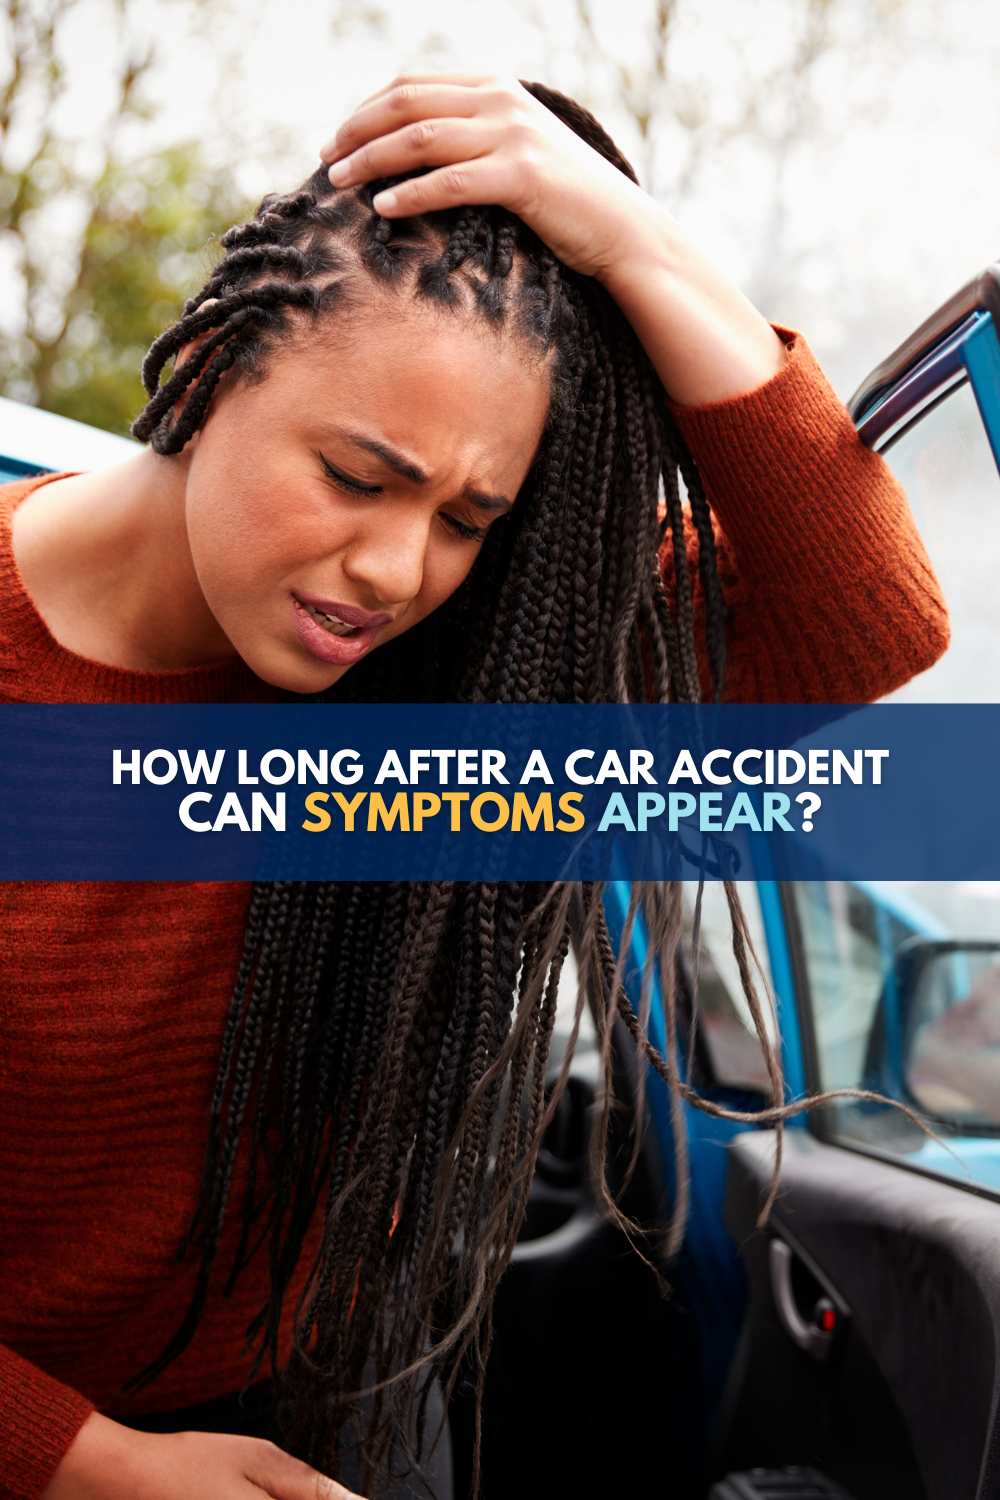 How Long After a Car Accident Can Injuries Appear?